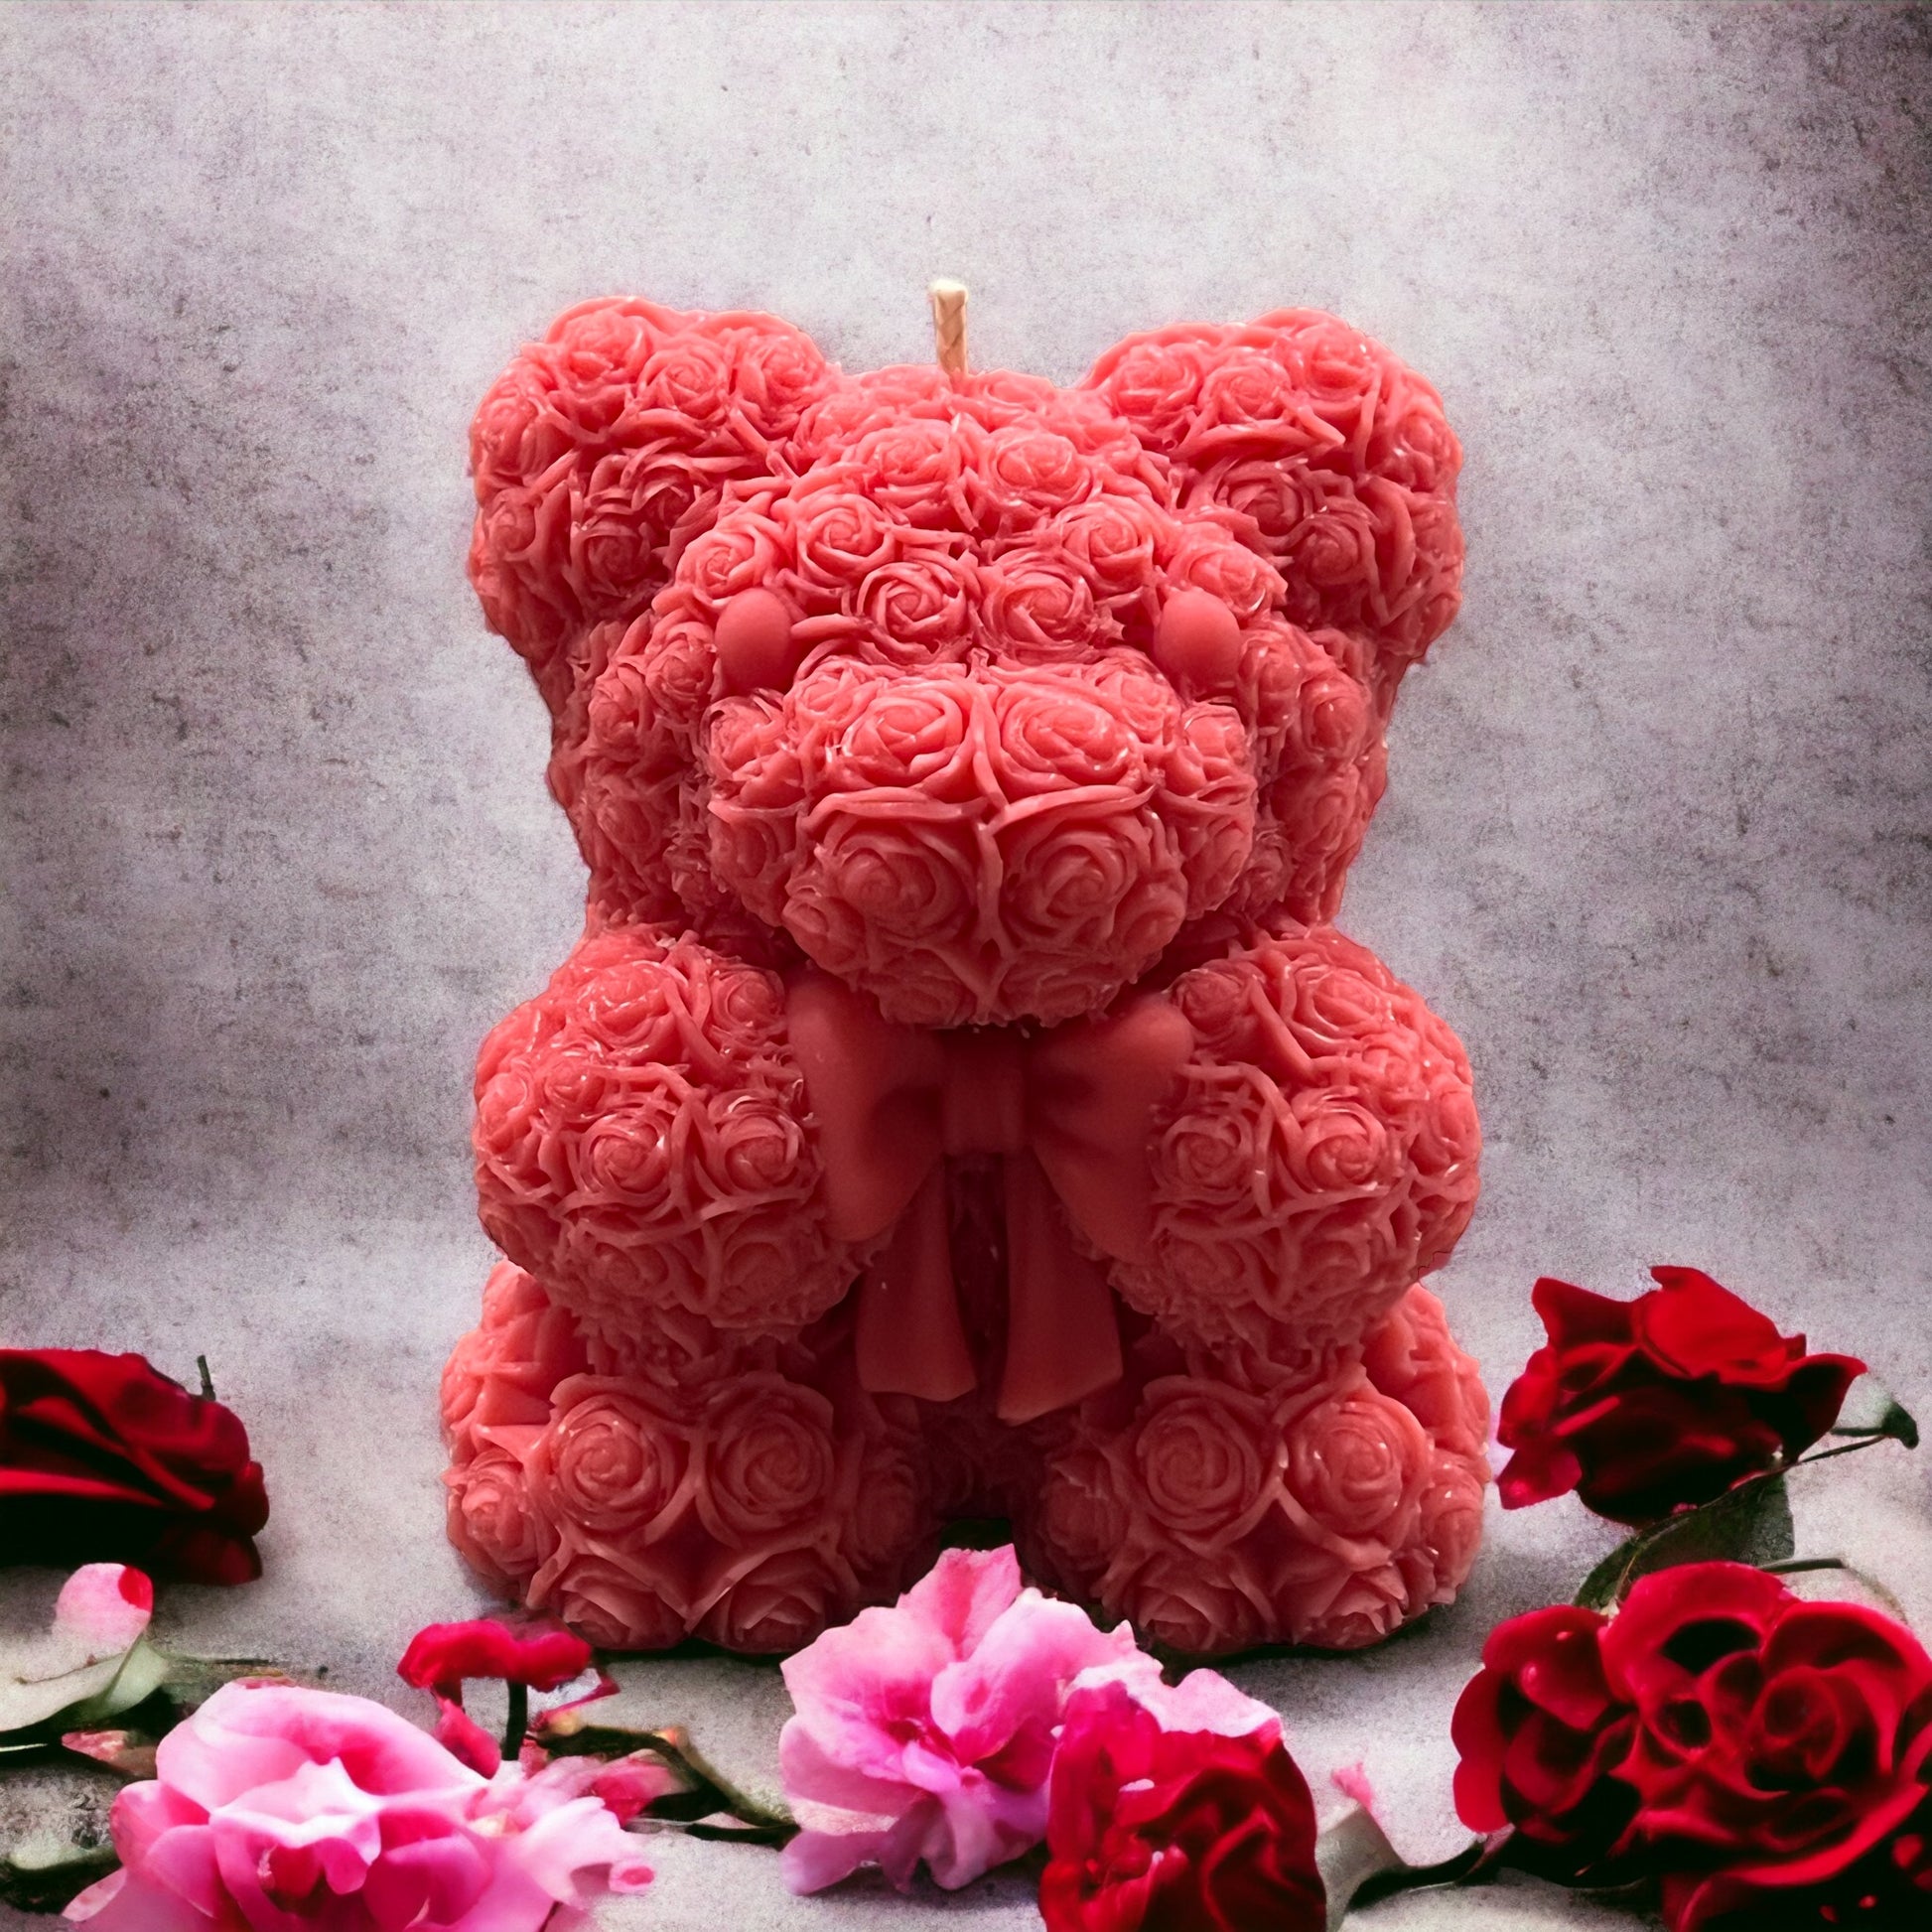 Teddy Bear Candle, Soy Wax, Birthday Gift, Romantic Candle